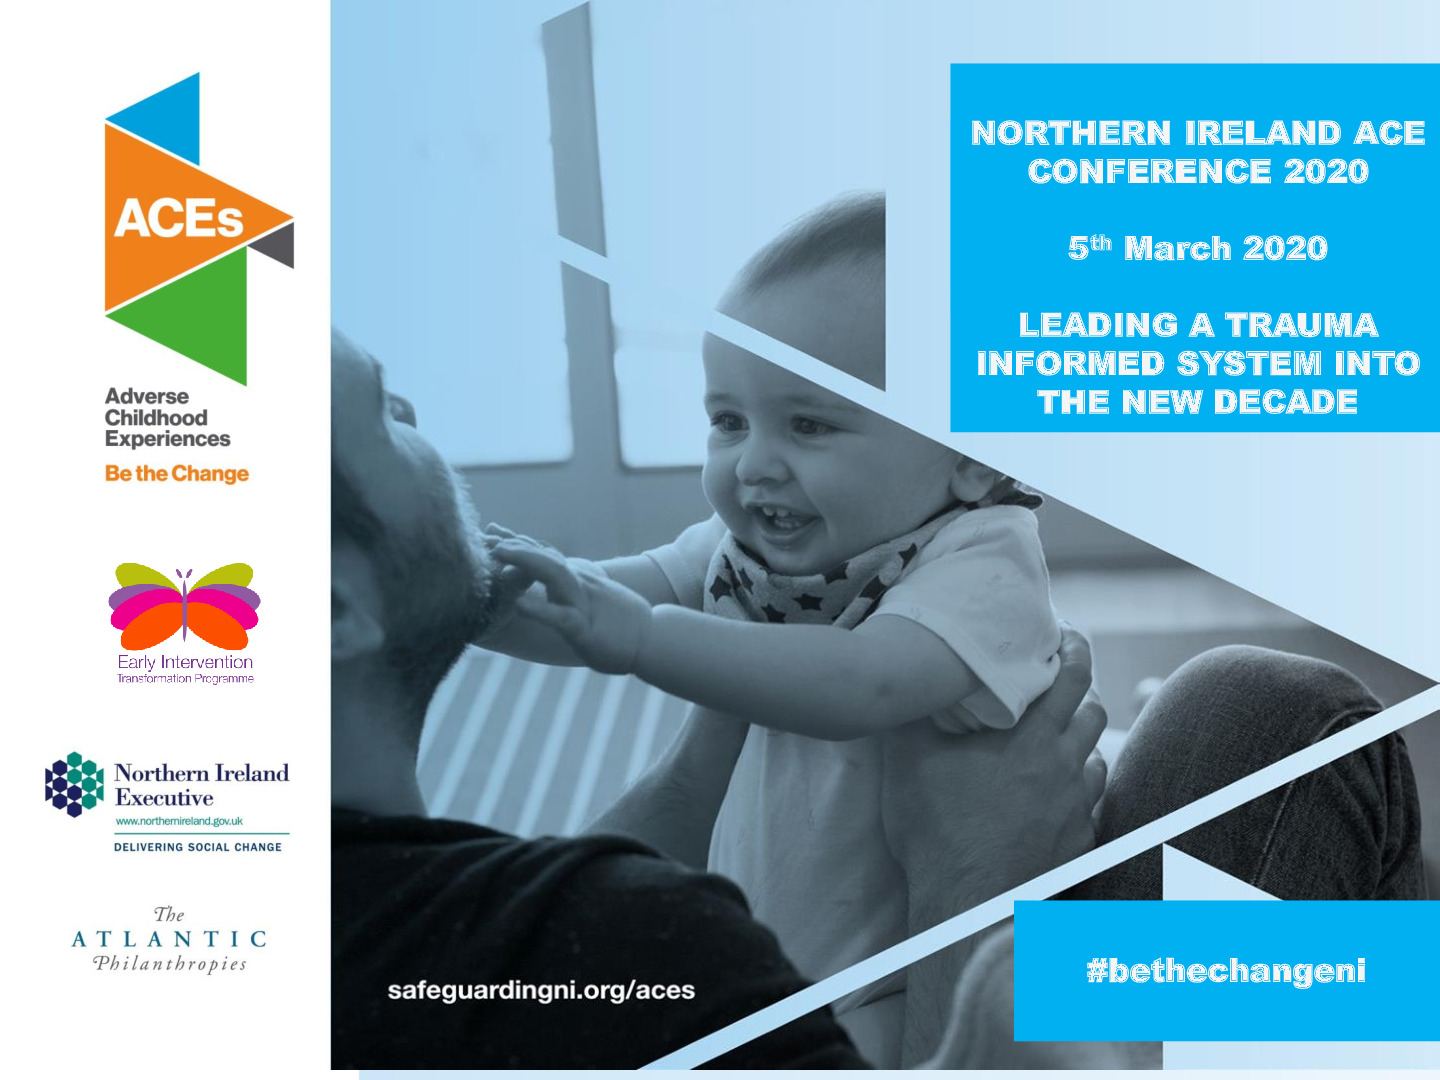 NI ACE Conference 2020 - 5 March 2020 - HSCLC presentation